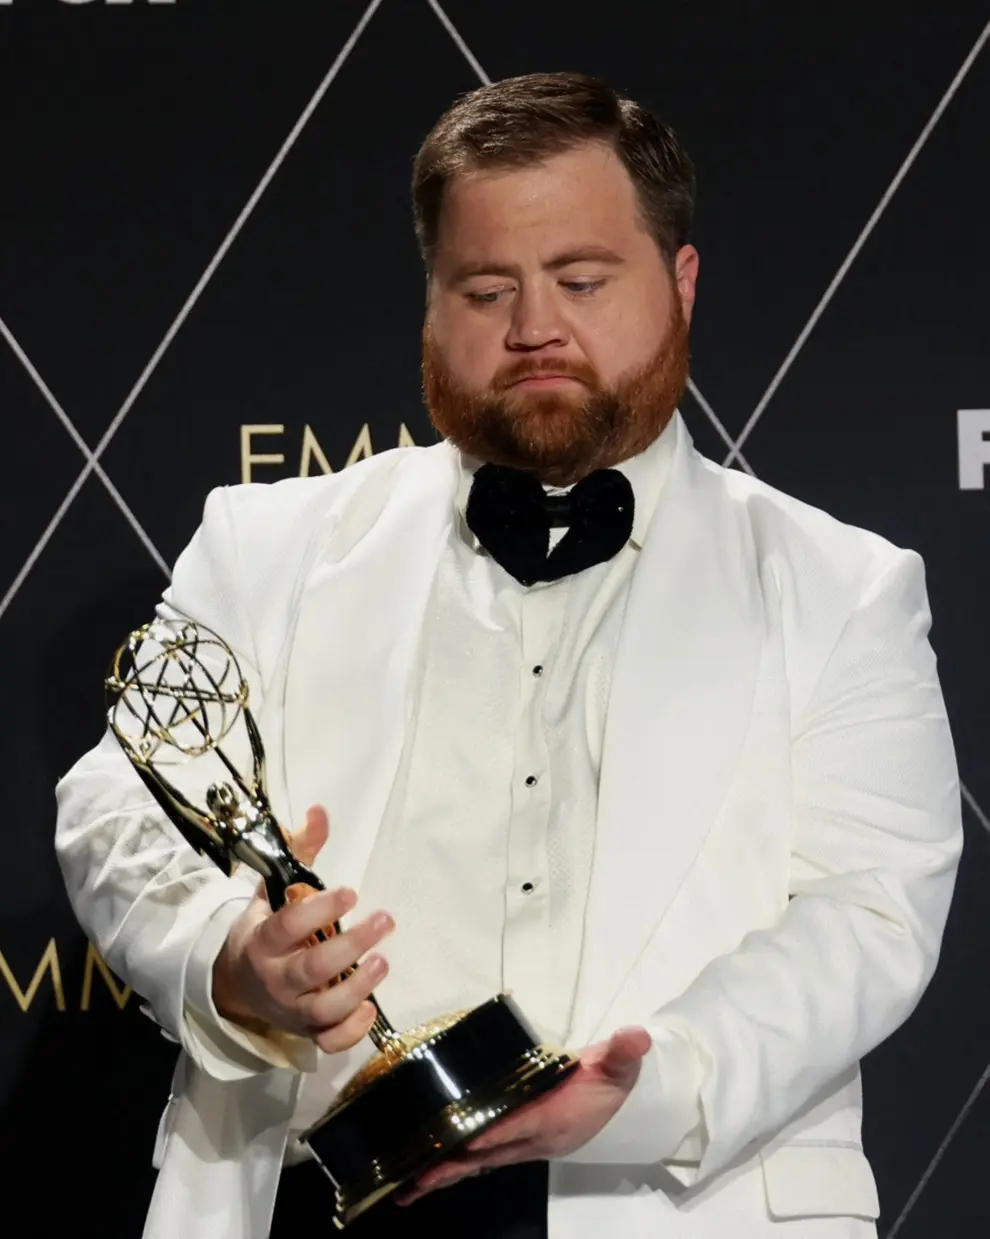 Lee Sung Jin accepts the award for Writing for a Limited/Anthology Series or Movie for [[[REUTERS VOCENTO]]] AWARDS-EMMYS/